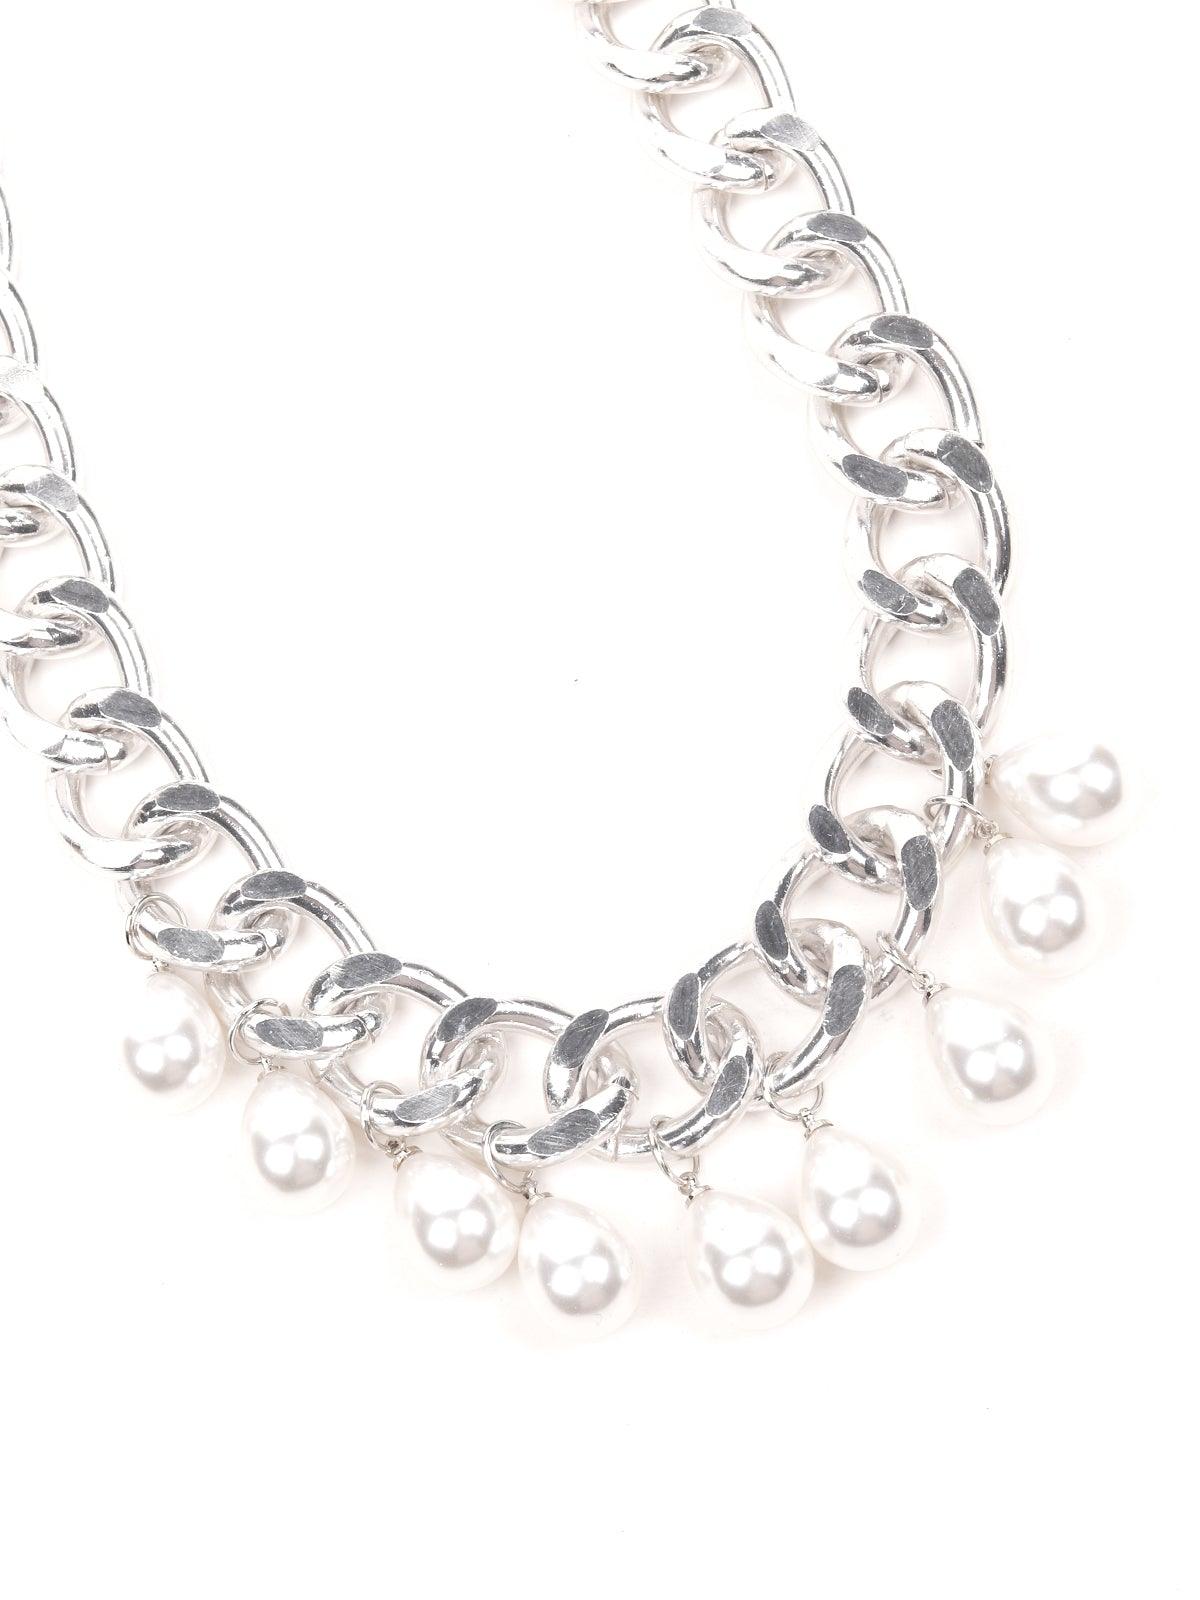 Stunning Interlinked Silver Chain With White Stones Embedded. - Odette